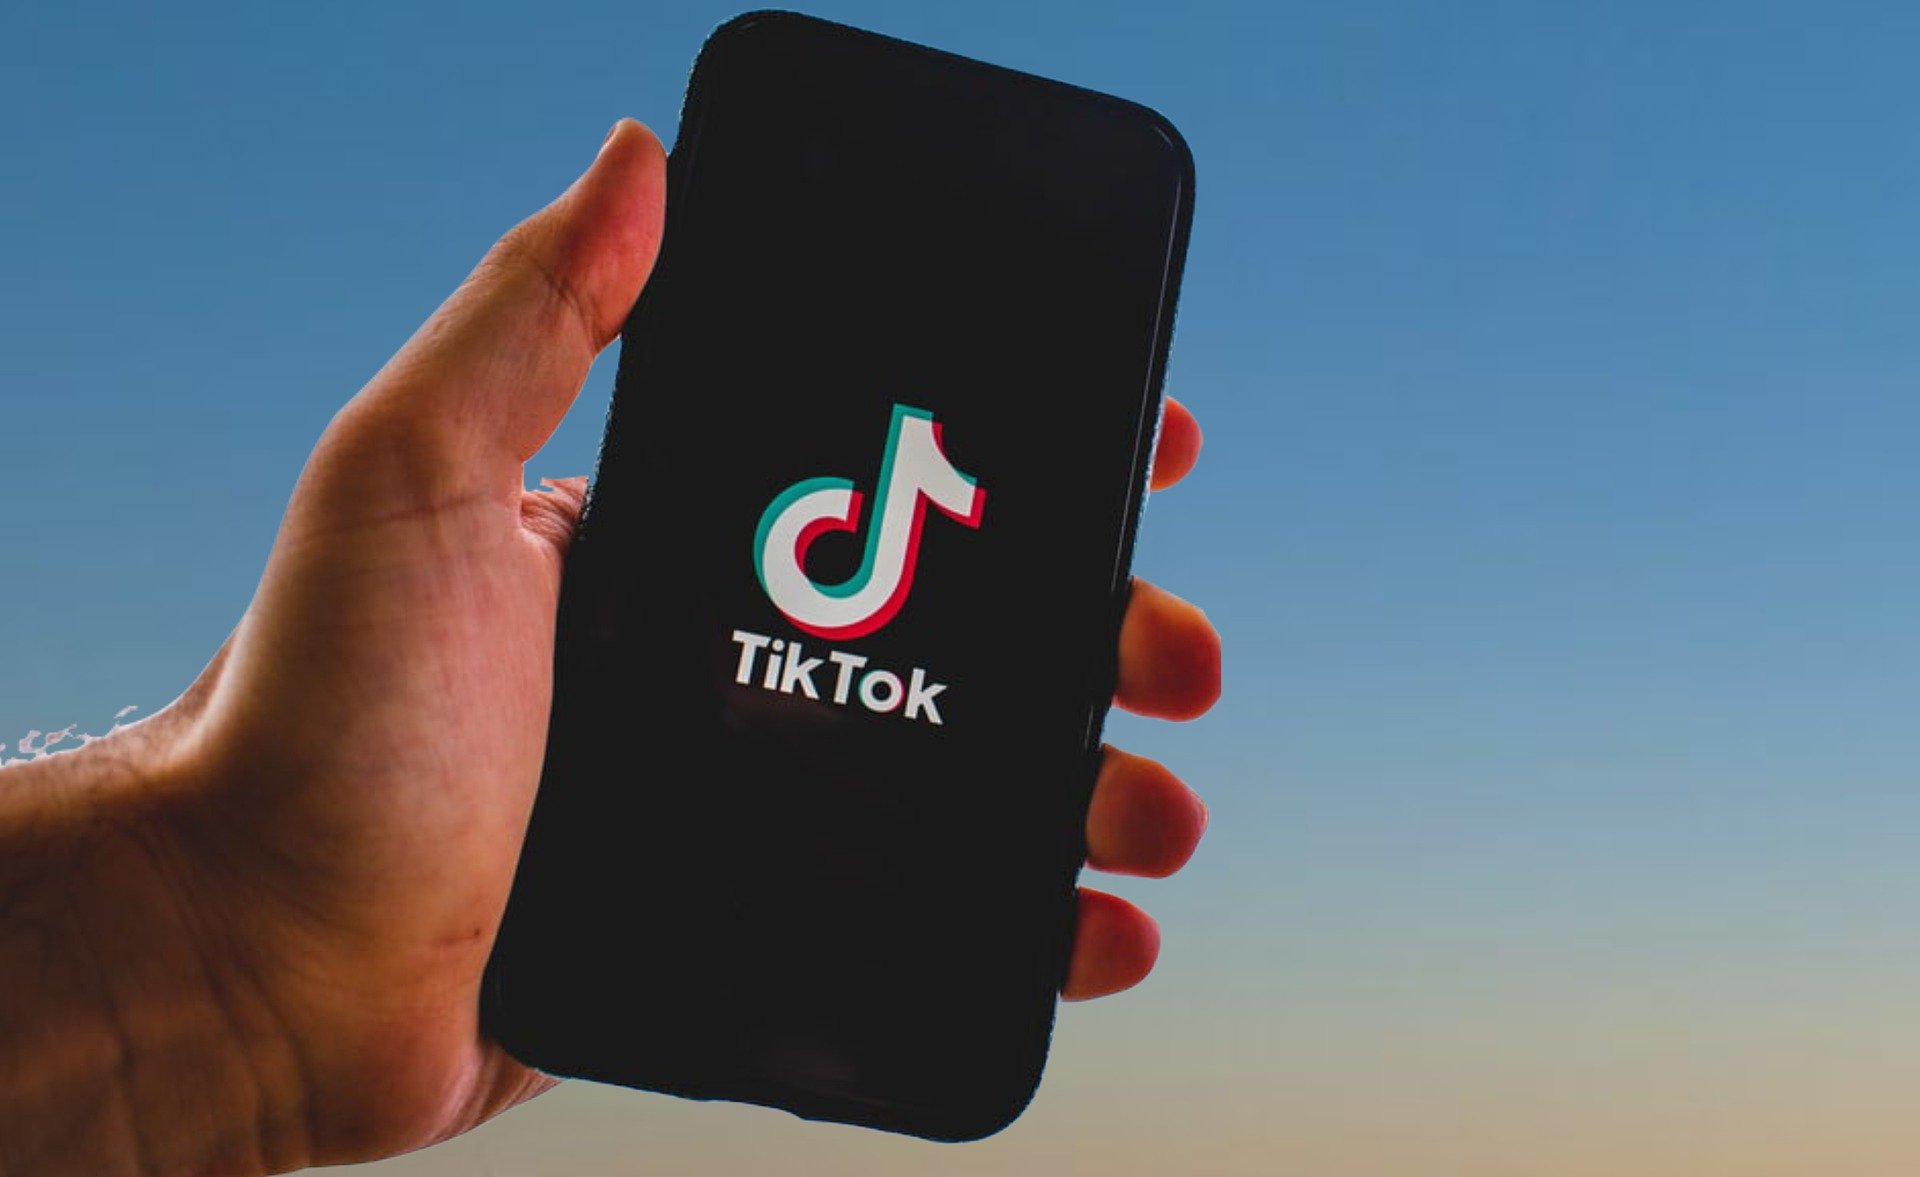 TikTok Has a New Q&A Feature, Here’s How It Works